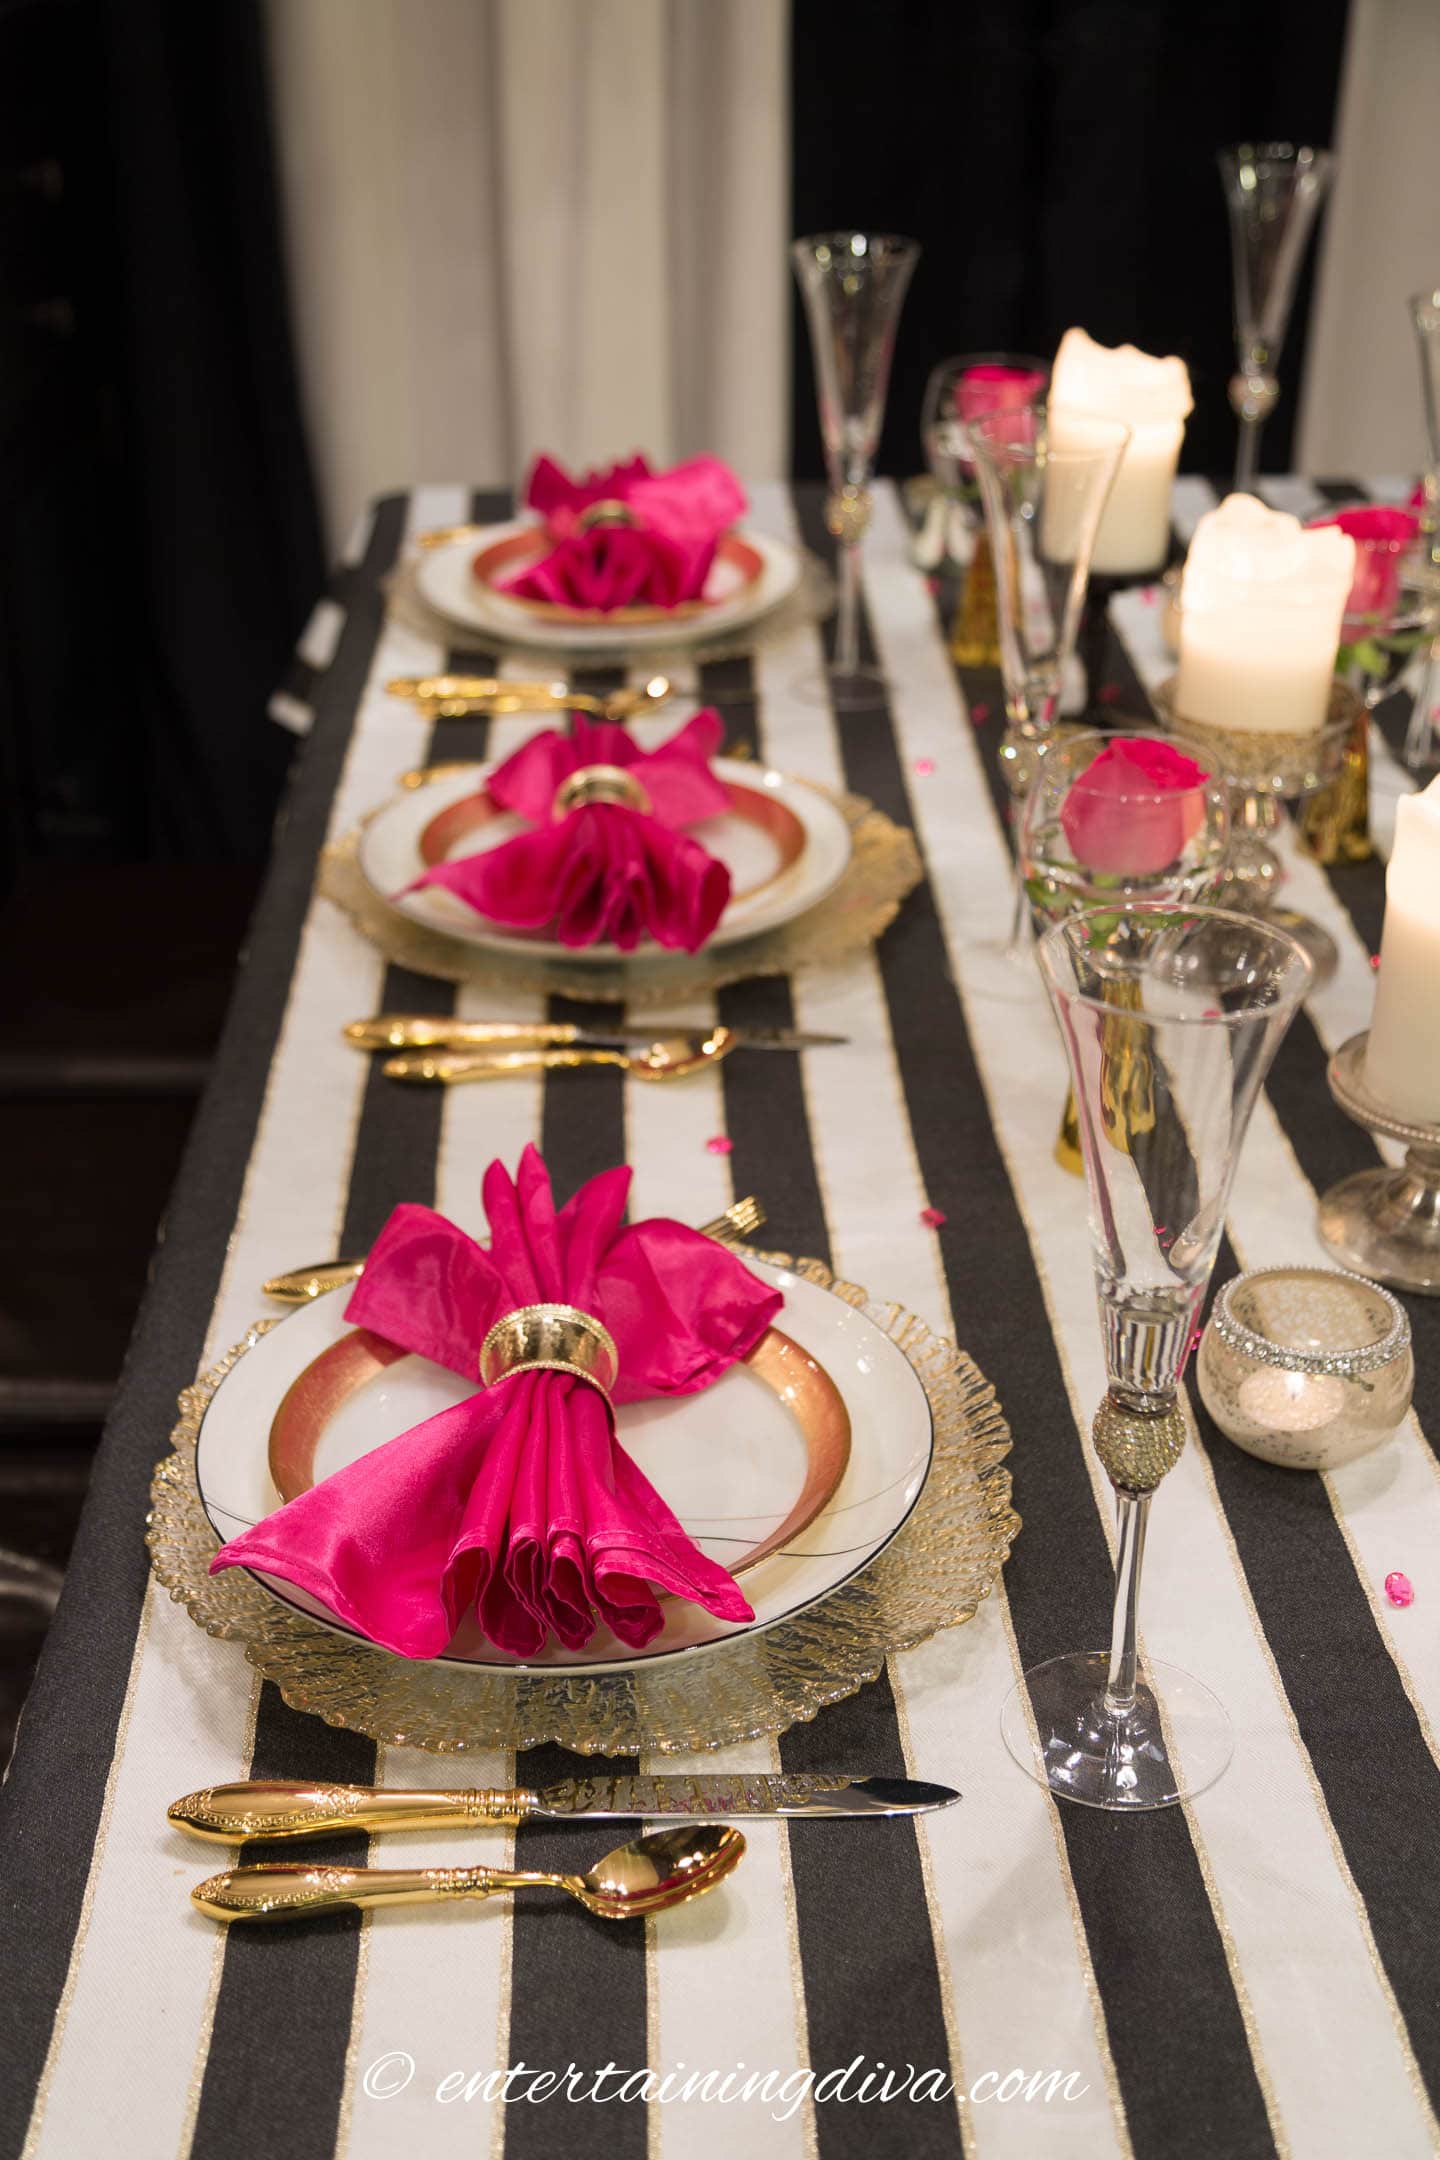 black, white and pink table setting with a black and white striped tablecloth.